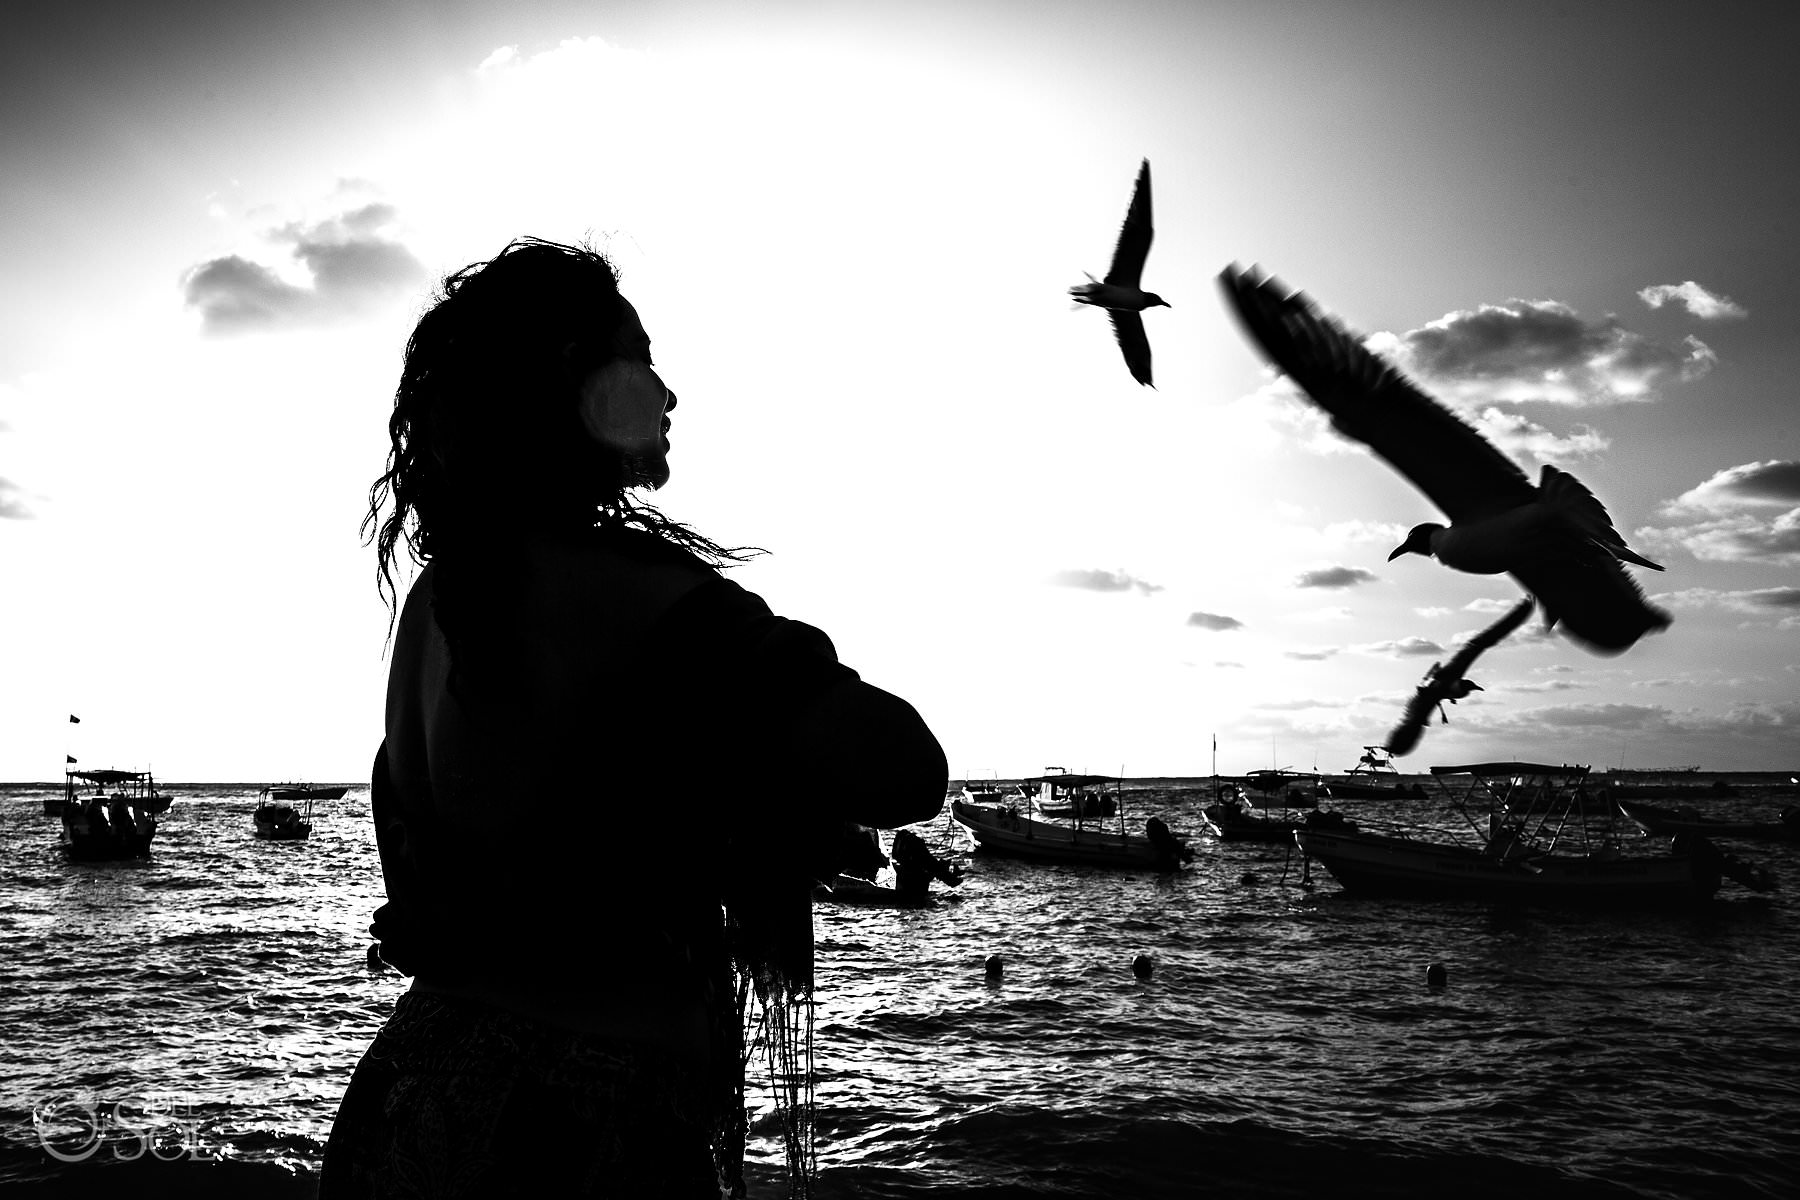  Woman silhouette with bird Riviera Maya Alternative Therapy Wings to Fly